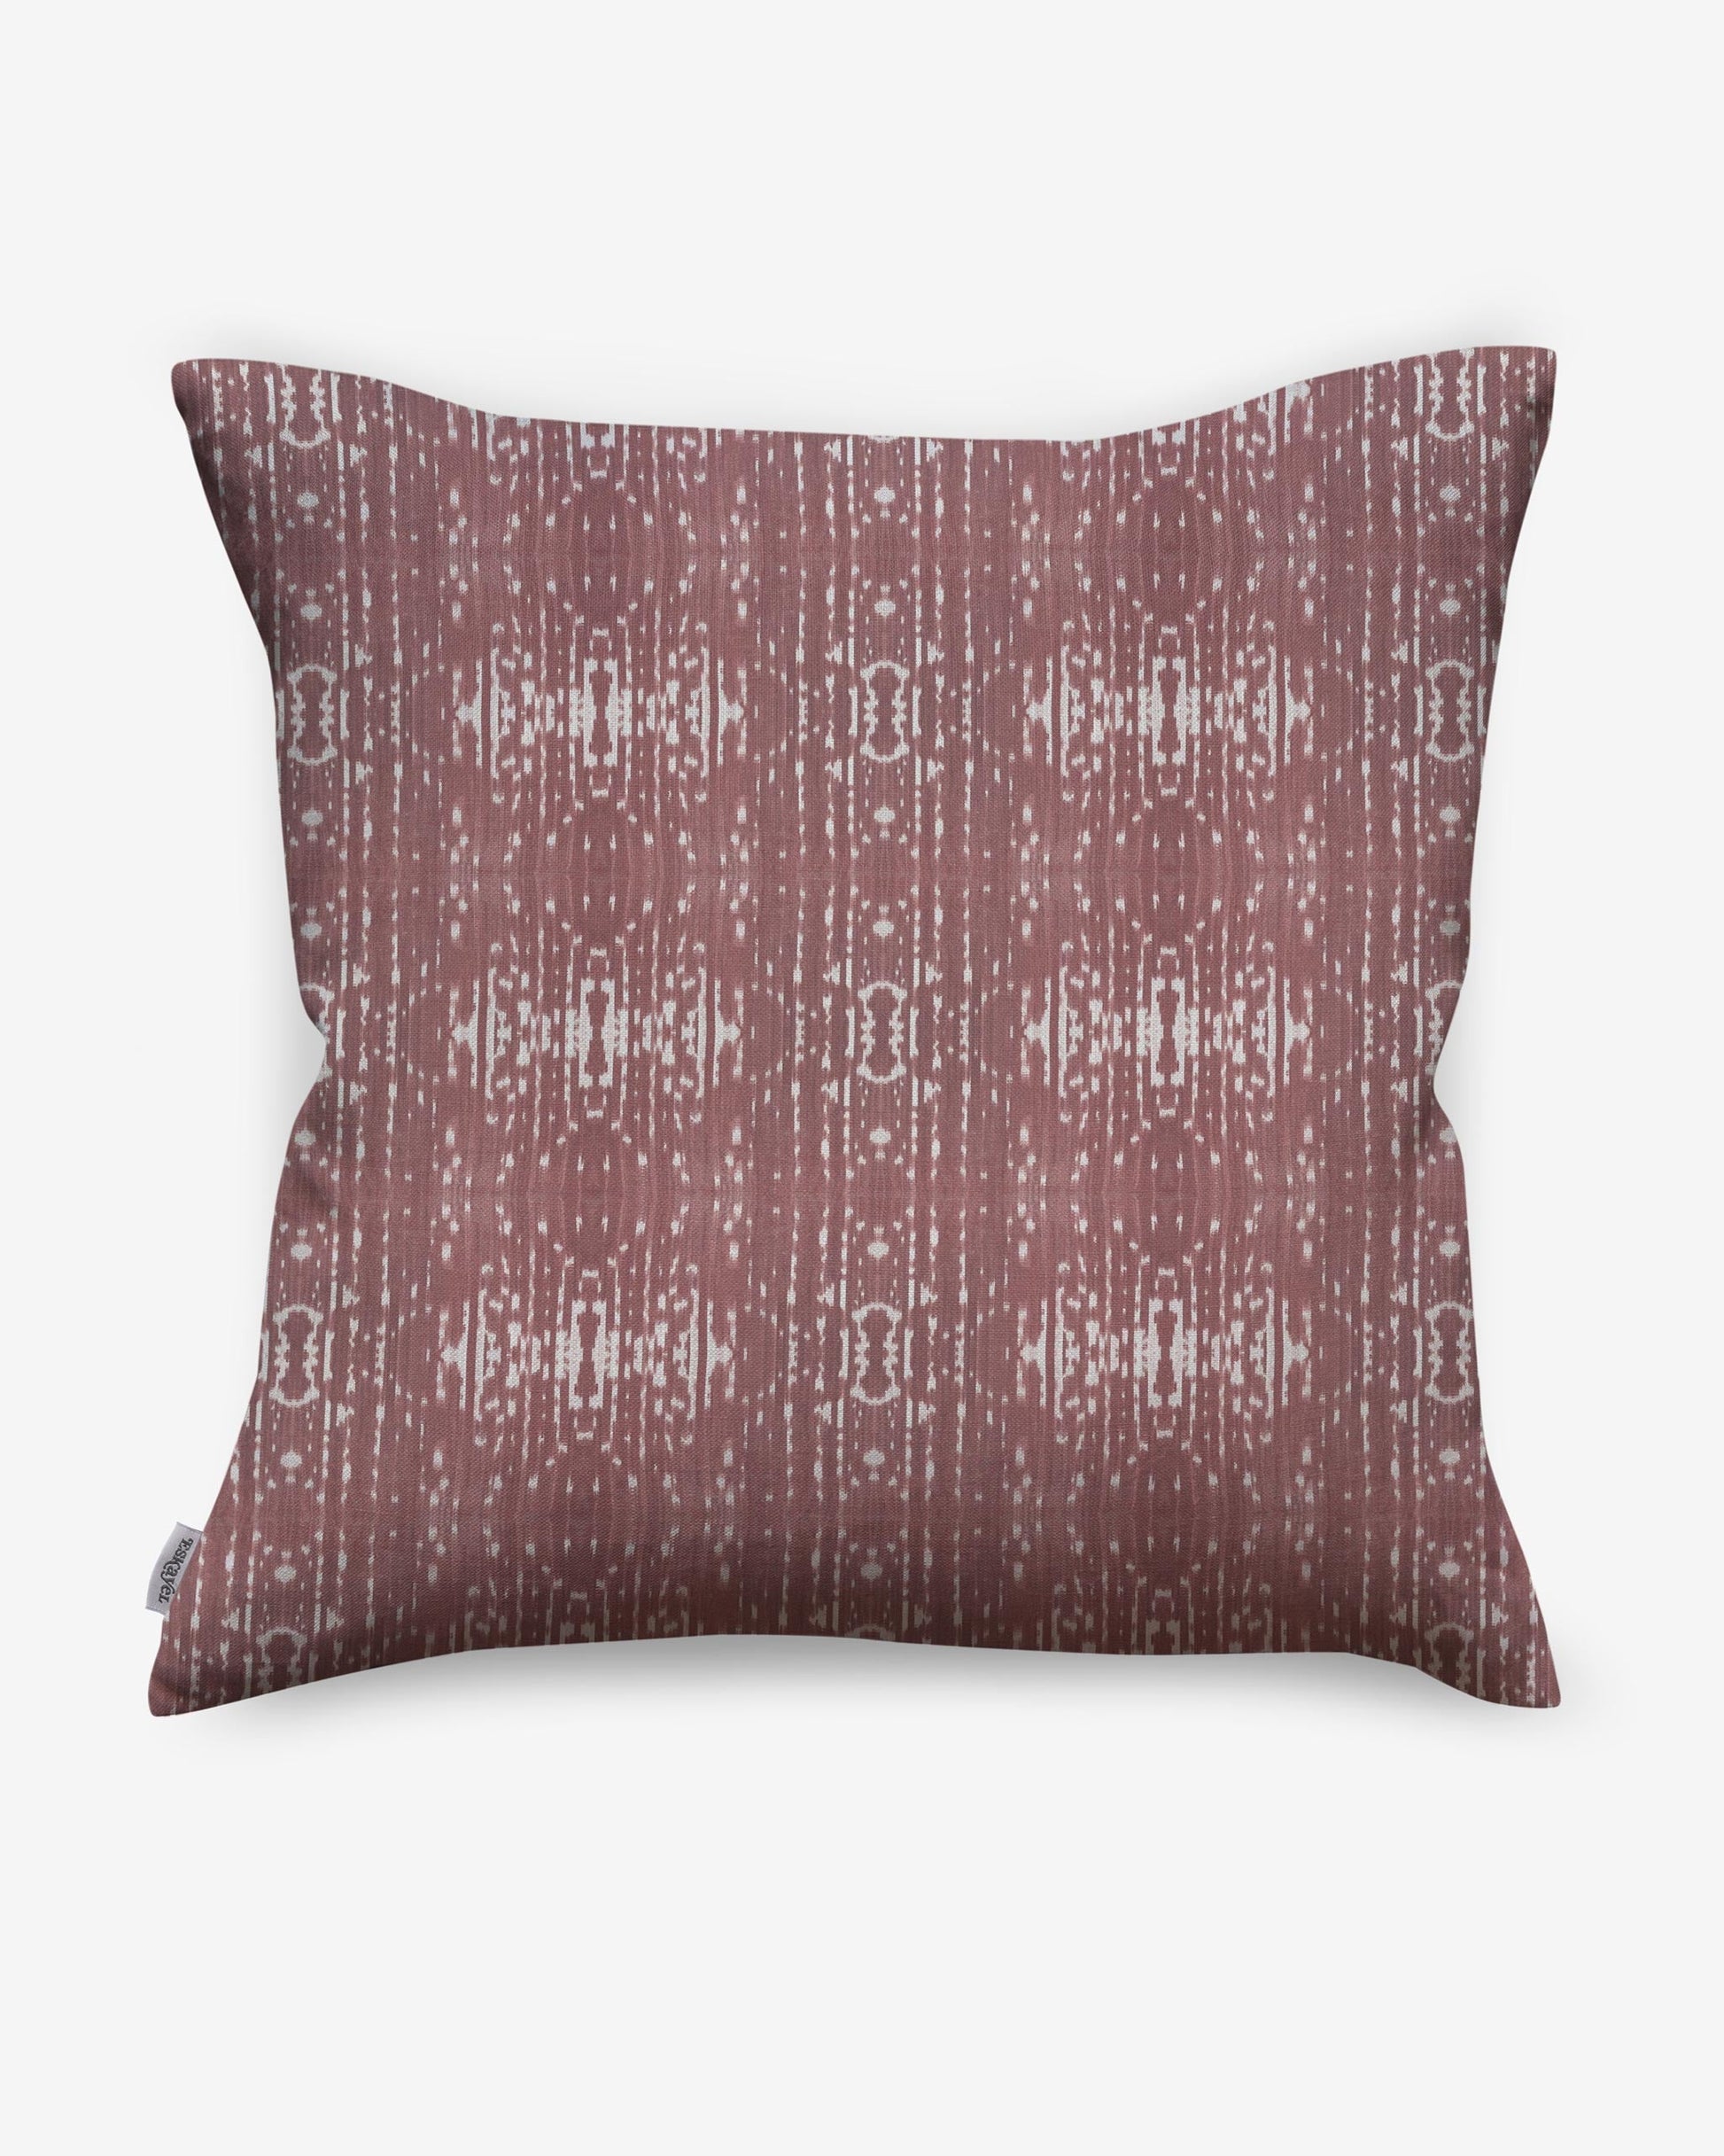 A Omaha Kinship Pillow Morinda Ikat with a maroon and white geometric pattern inspired by the Kwoma people of Papua New Guinea